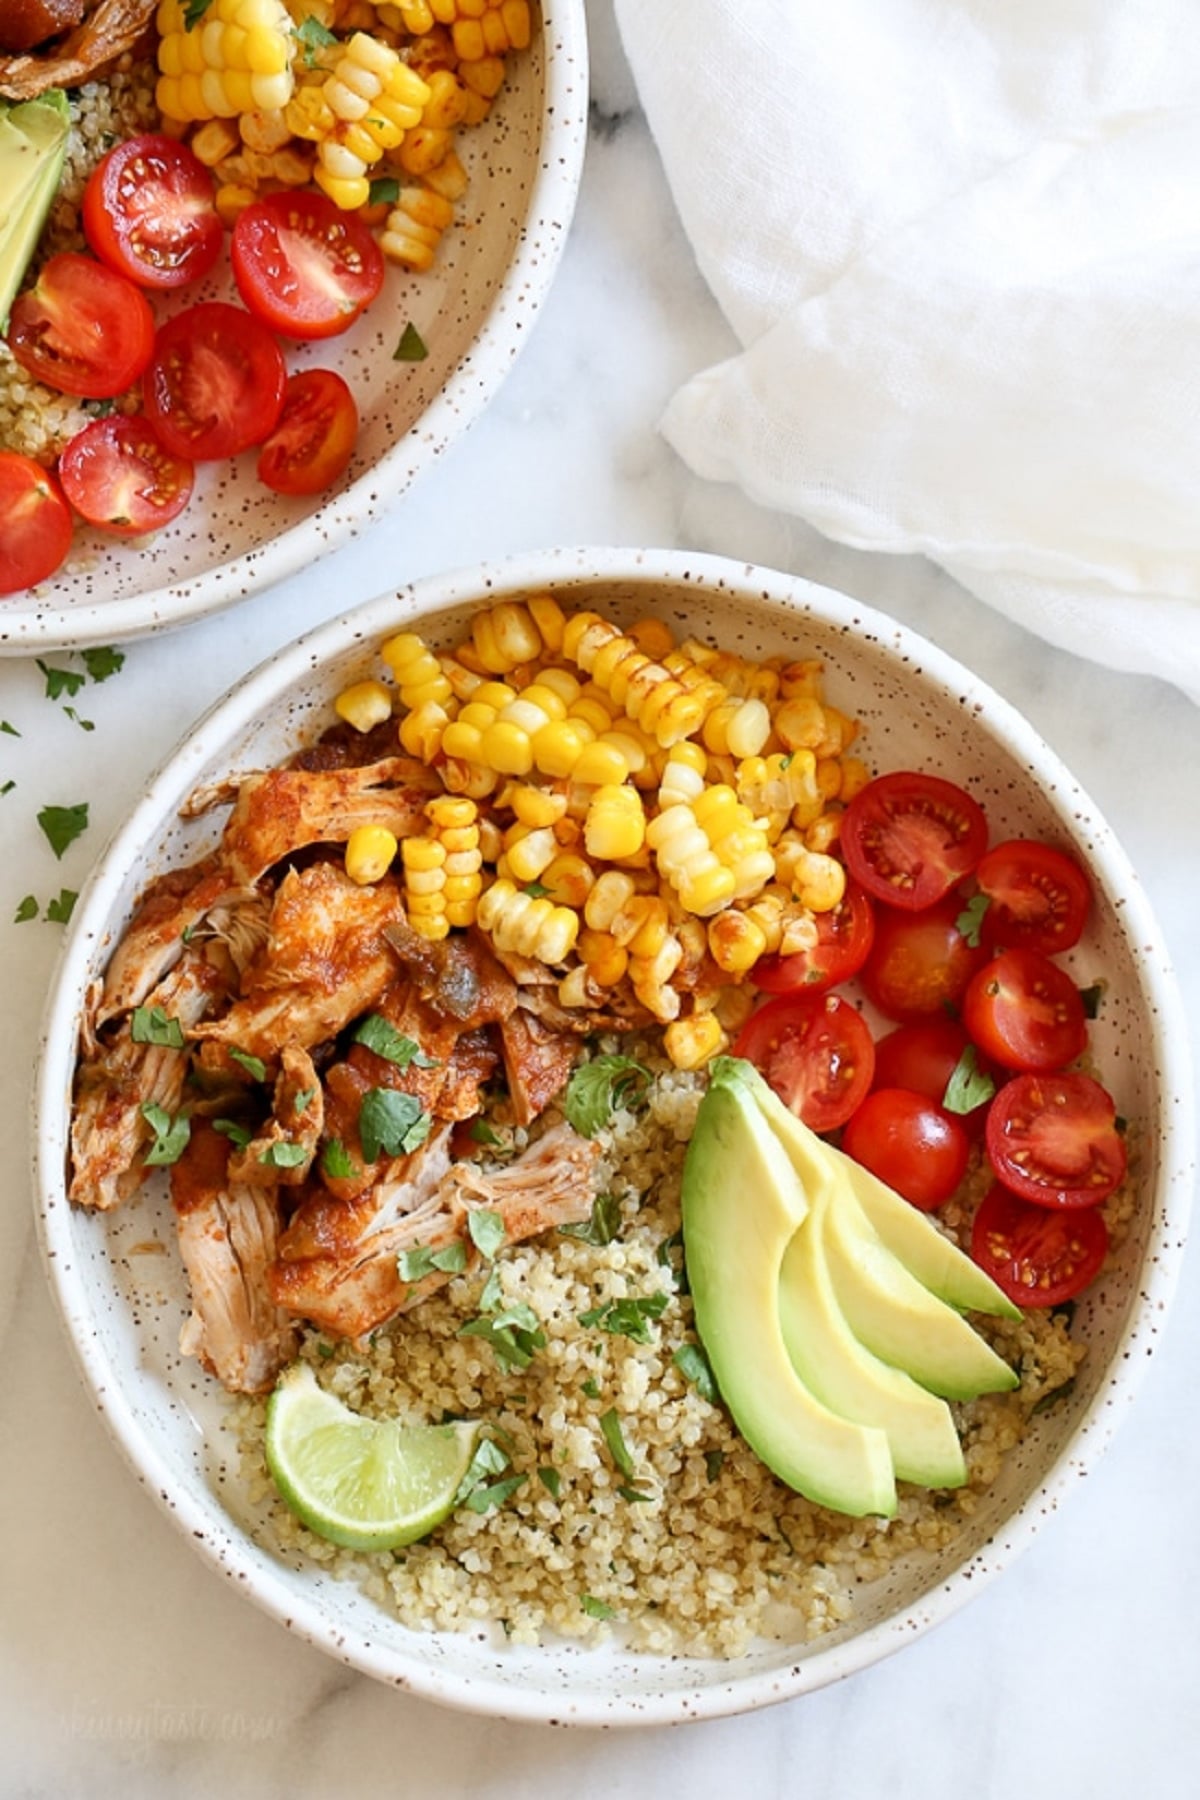 Instant pot chipotle chicken bowls with cilantro lime quinoa, cherry tomatoes and sliced avocado